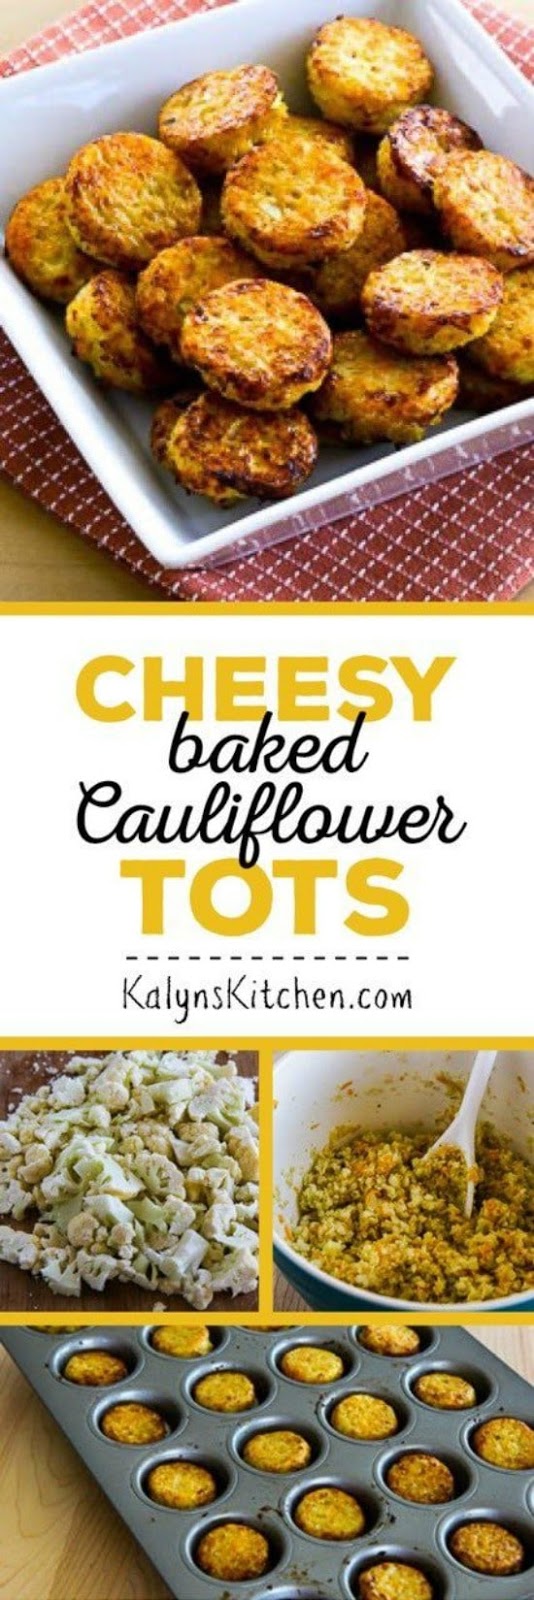 LOW-CARB CHEESY BAKED CAULIFLOWER TOTS (VIDEO)